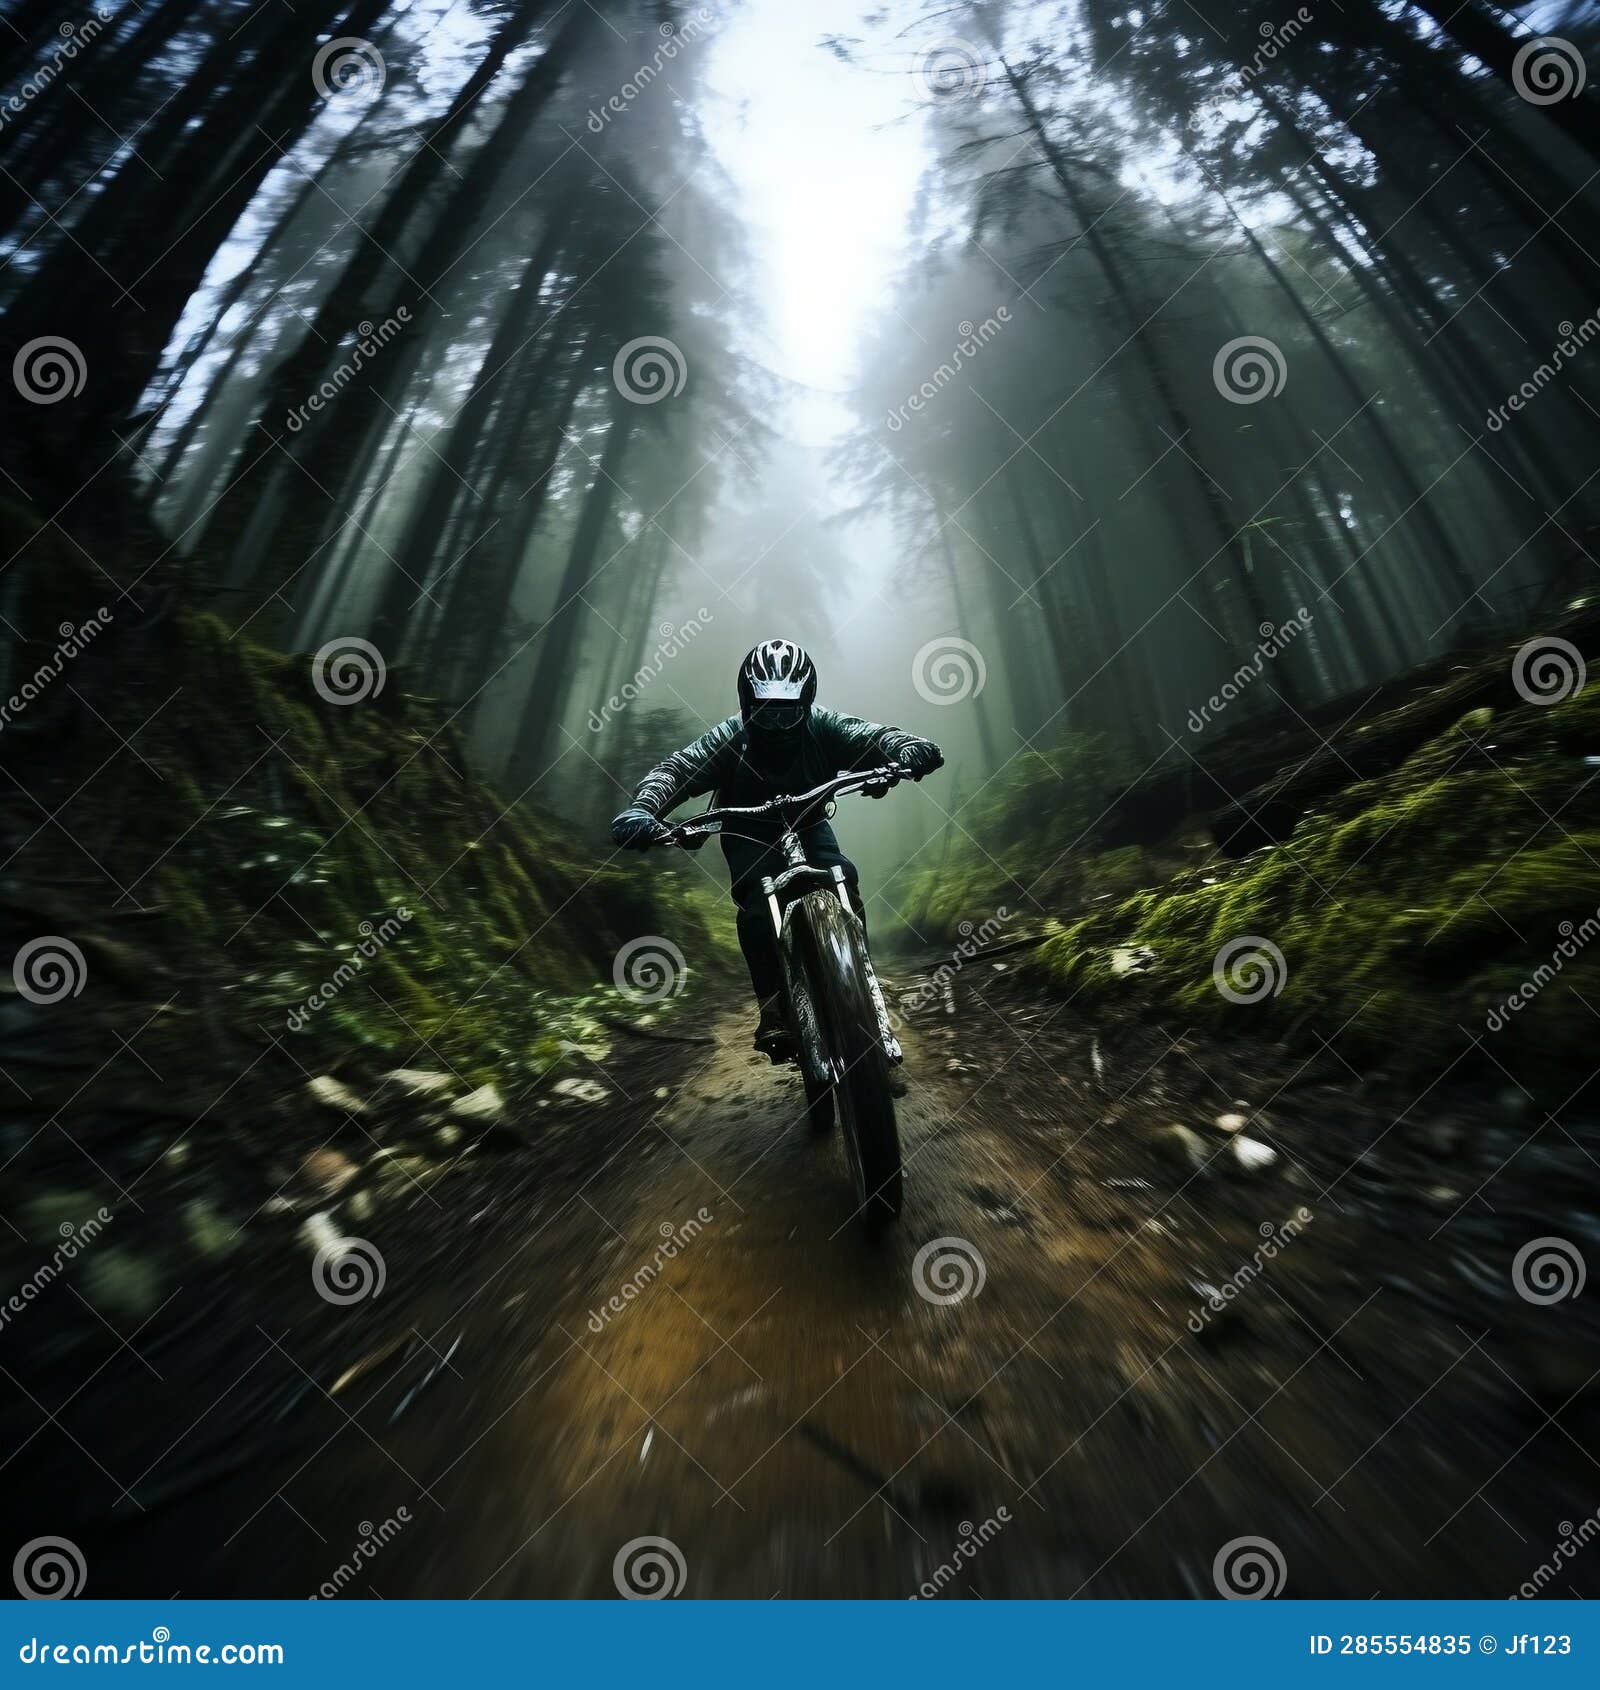 forest rush: a thrilling mountain bike adventure